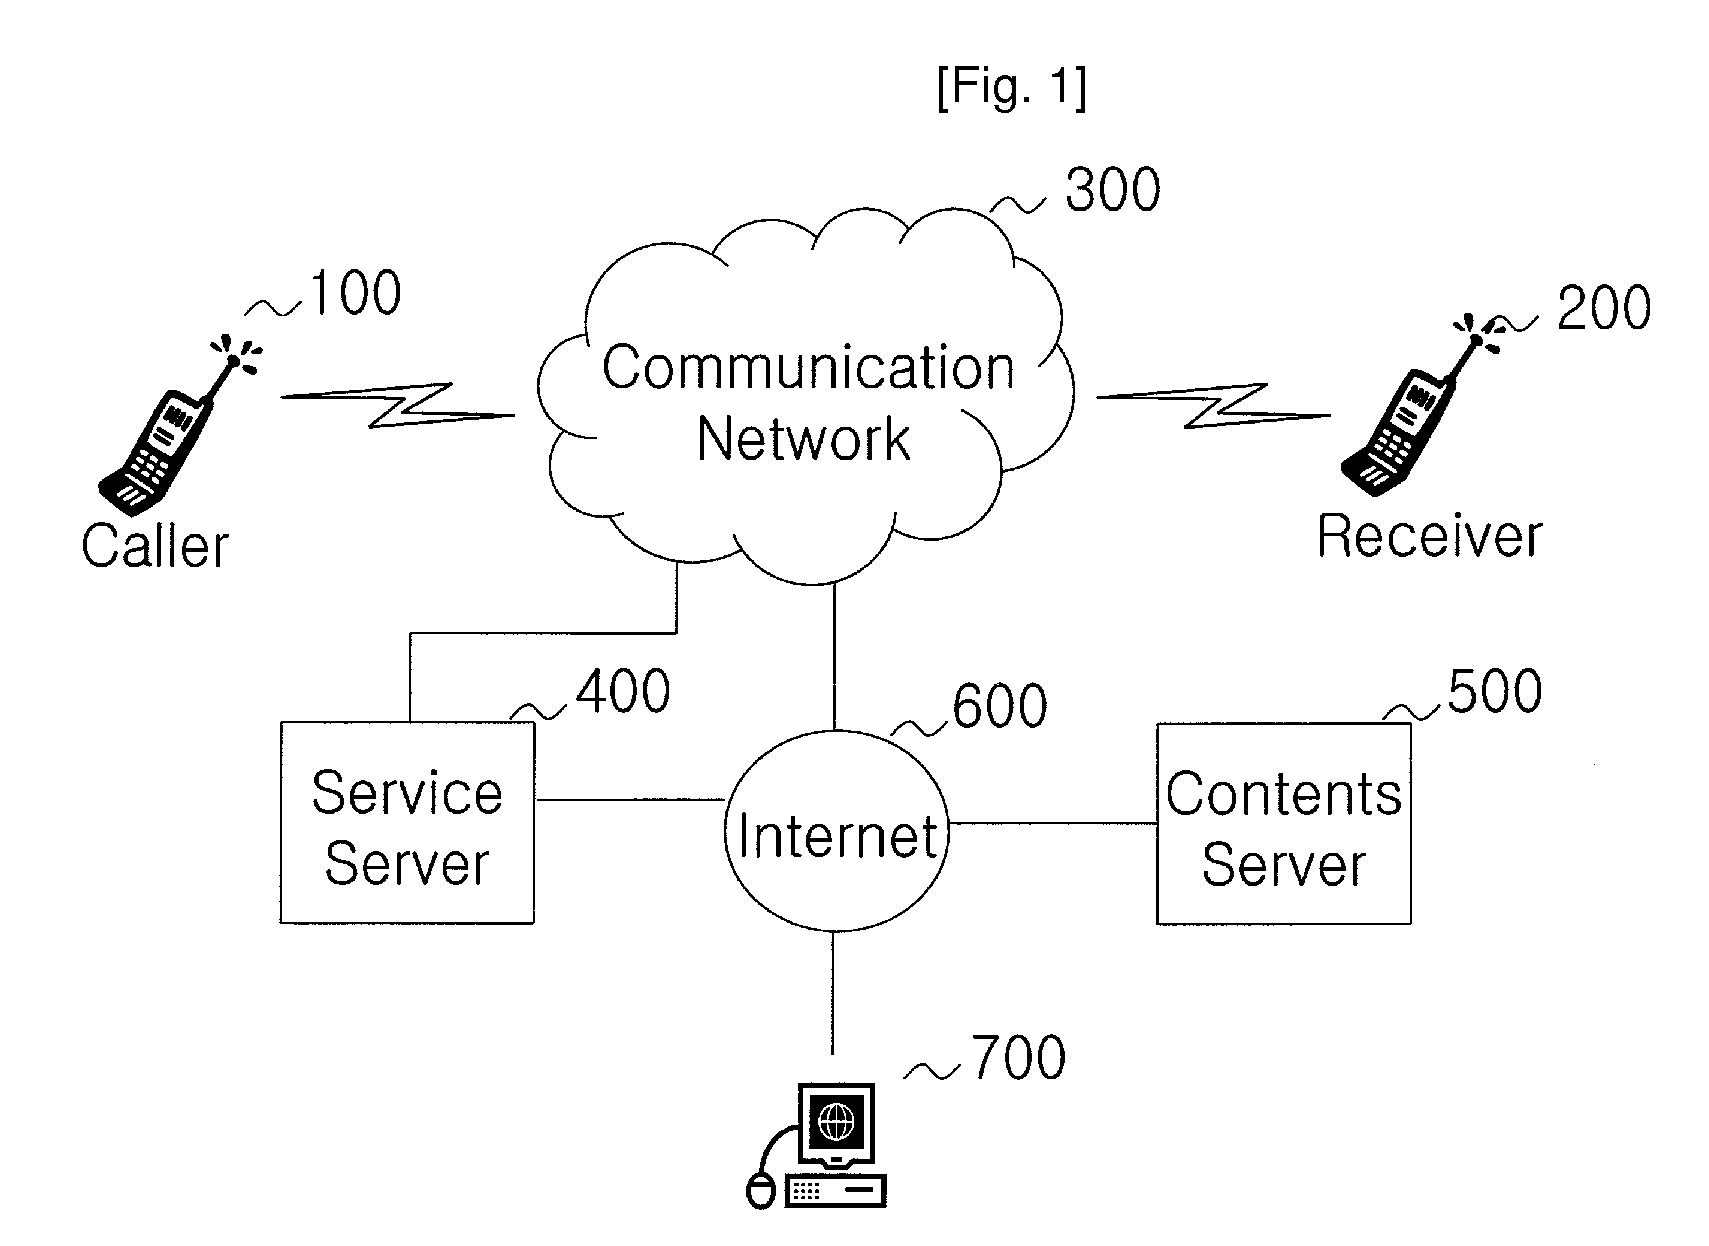 Dynamic URL self-formation in accordance with combining caller & receiver's information